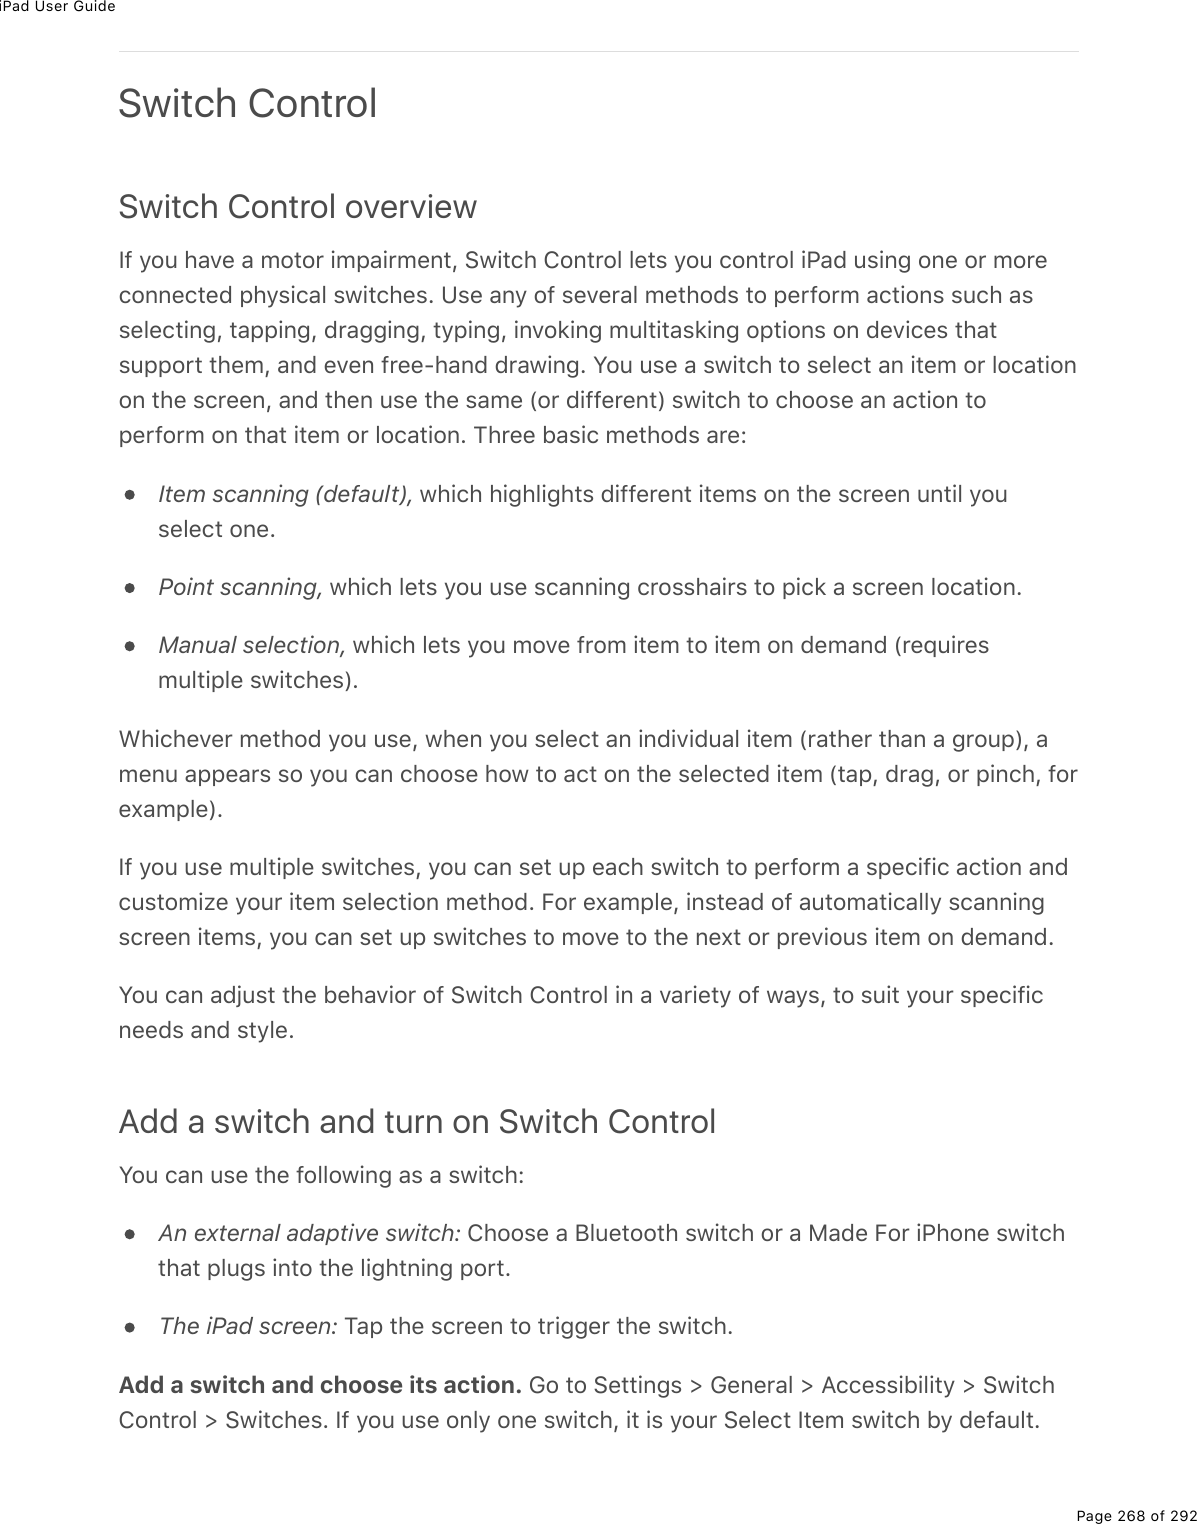 iPad User GuidePage 268 of 292Switch ControlSwitch Control overviewIf you have a motor impairment, Switch Control lets you control iPad using one or moreconnected physical switches. Use any of several methods to perform actions such asselecting, tapping, dragging, typing, invoking multitasking options on devices thatsupport them, and even free-hand drawing. You use a switch to select an item or locationon the screen, and then use the same (or different) switch to choose an action toperform on that item or location. Three basic methods are:Item scanning (default), which highlights different items on the screen until youselect one.Point scanning, which lets you use scanning crosshairs to pick a screen location.Manual selection, which lets you move from item to item on demand (requiresmultiple switches).Whichever method you use, when you select an individual item (rather than a group), amenu appears so you can choose how to act on the selected item (tap, drag, or pinch, forexample).If you use multiple switches, you can set up each switch to perform a specific action andcustomize your item selection method. For example, instead of automatically scanningscreen items, you can set up switches to move to the next or previous item on demand.You can adjust the behavior of Switch Control in a variety of ways, to suit your specificneeds and style.Add a switch and turn on Switch ControlYou can use the following as a switch:An external adaptive switch: Choose a Bluetooth switch or a Made For iPhone switchthat plugs into the lightning port.The iPad screen: Tap the screen to trigger the switch.Add a switch and choose its action. Go to Settings &gt; General &gt; Accessibility &gt; SwitchControl &gt; Switches. If you use only one switch, it is your Select Item switch by default.